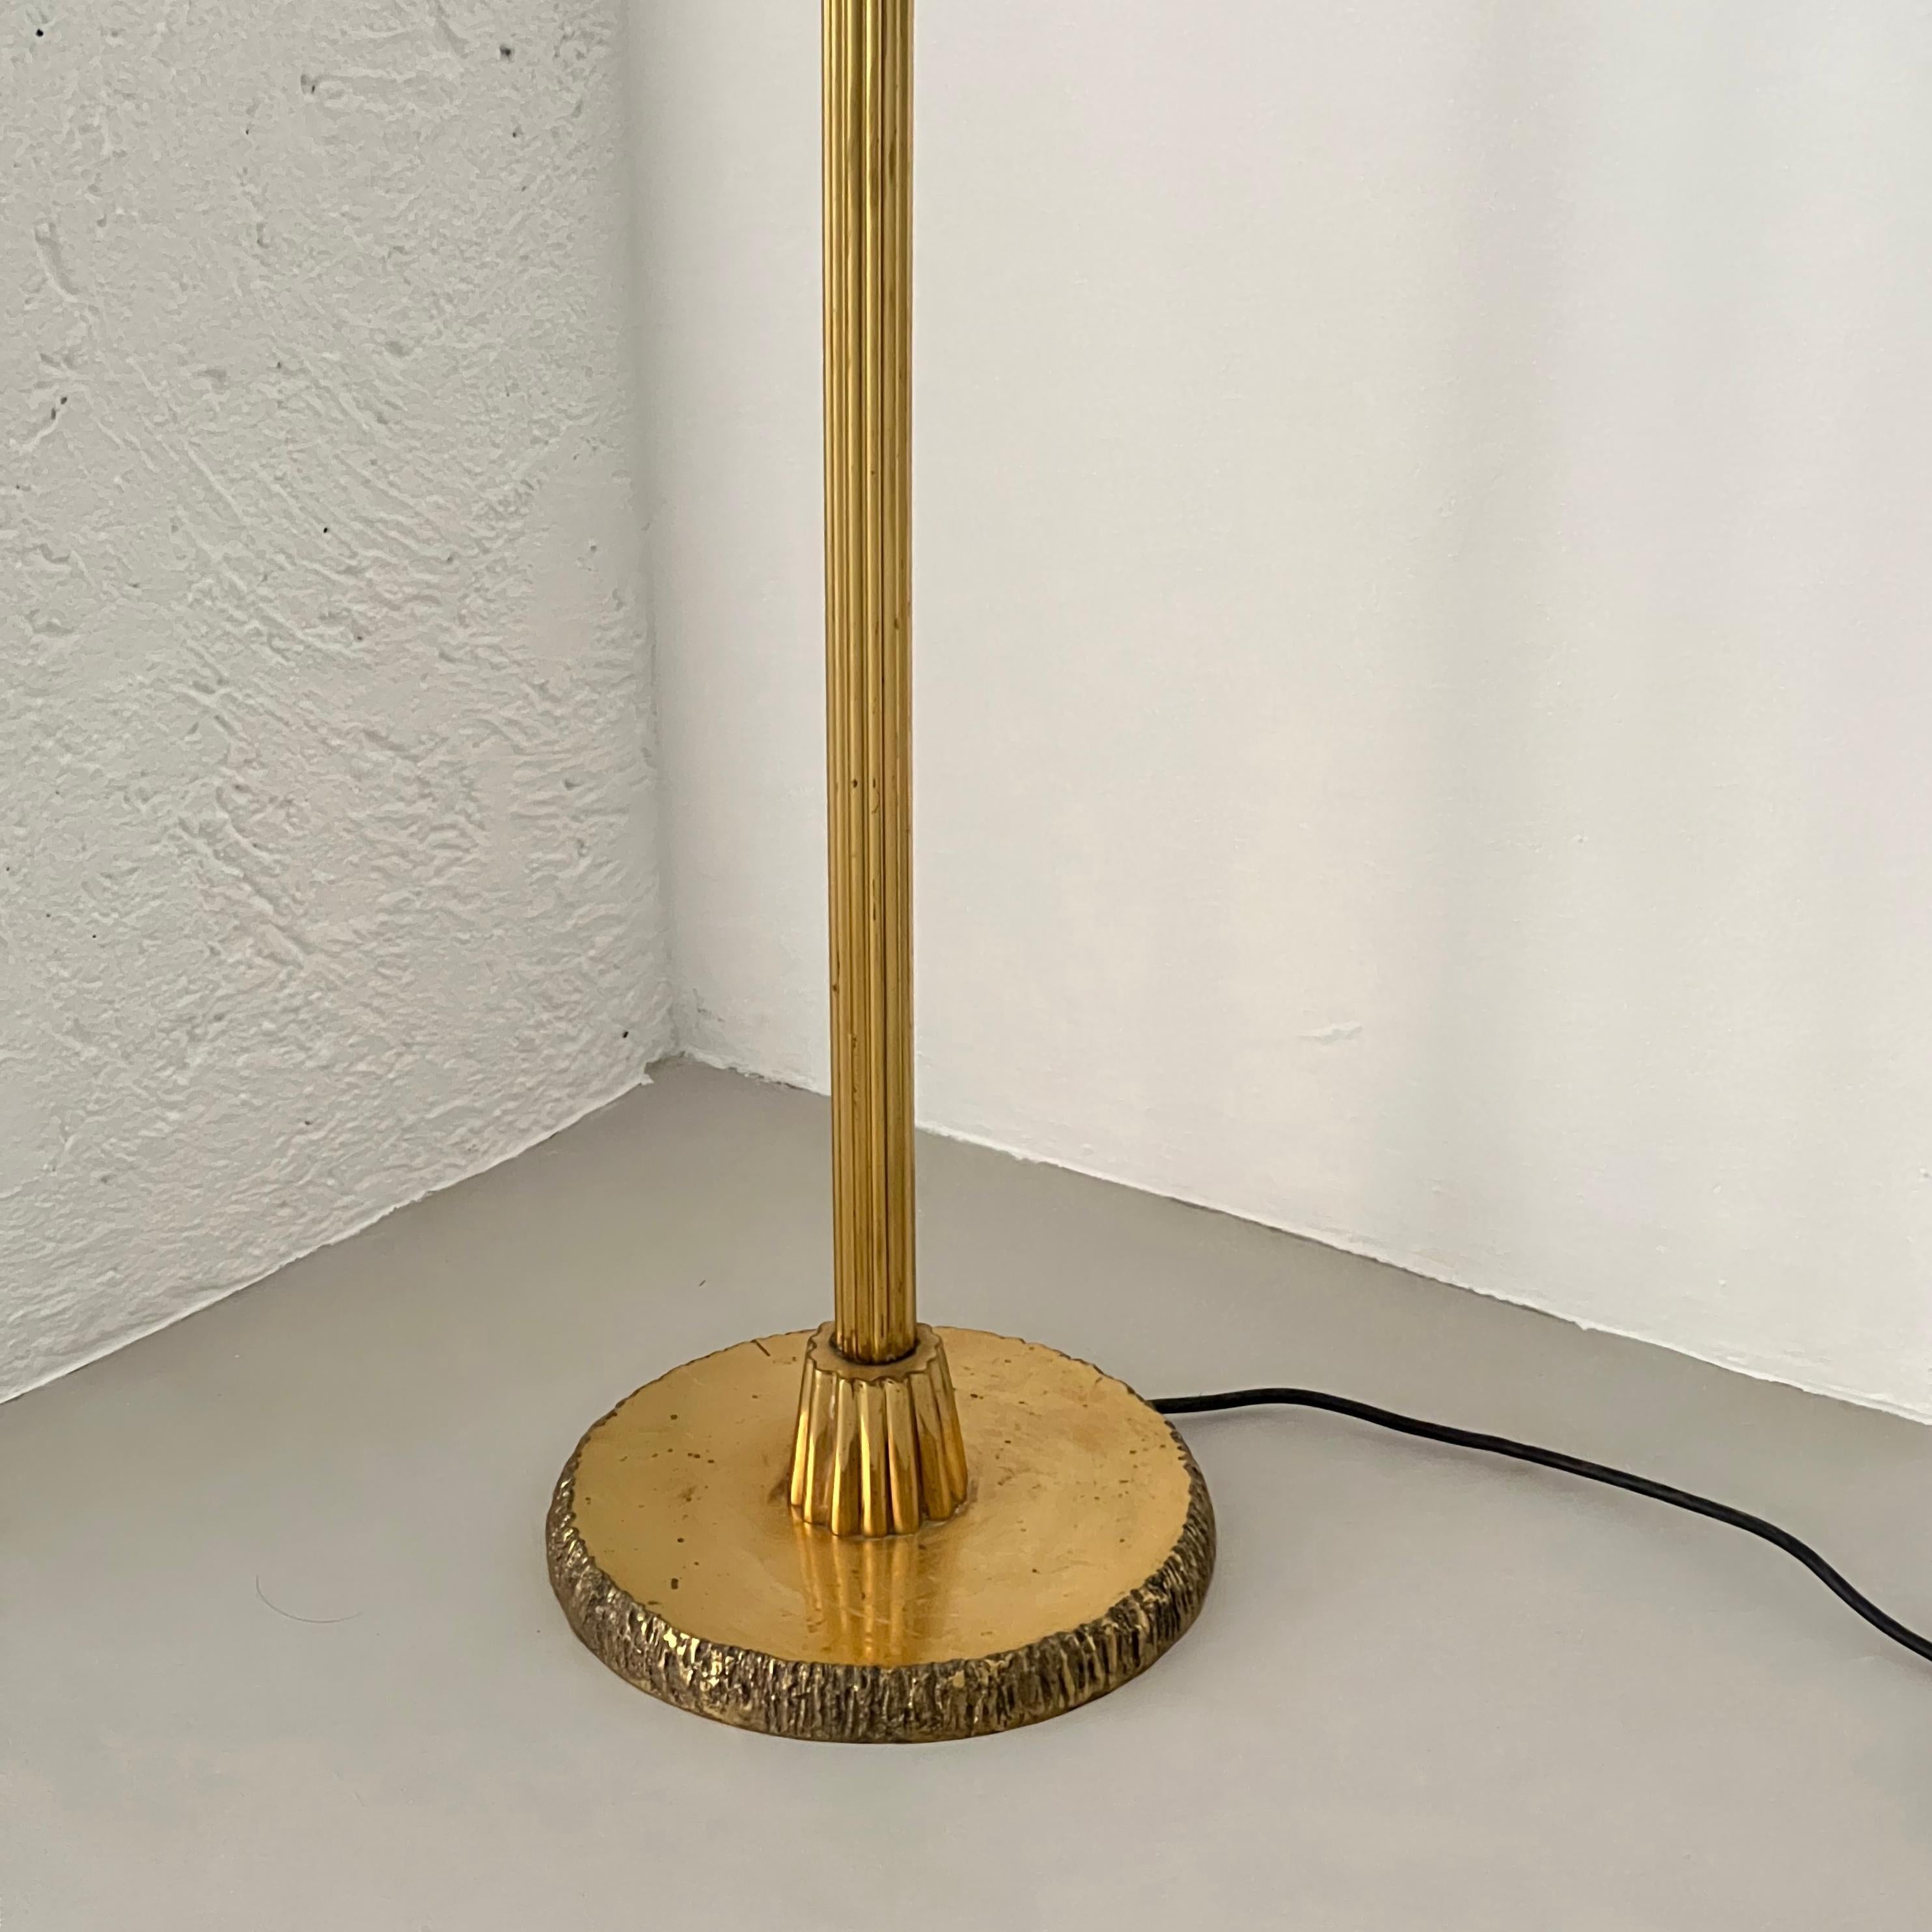 Vintage 50s Italian brass sculptural floor lamp, heart shaped shade, bark finish In Good Condition For Sale In Milano, IT